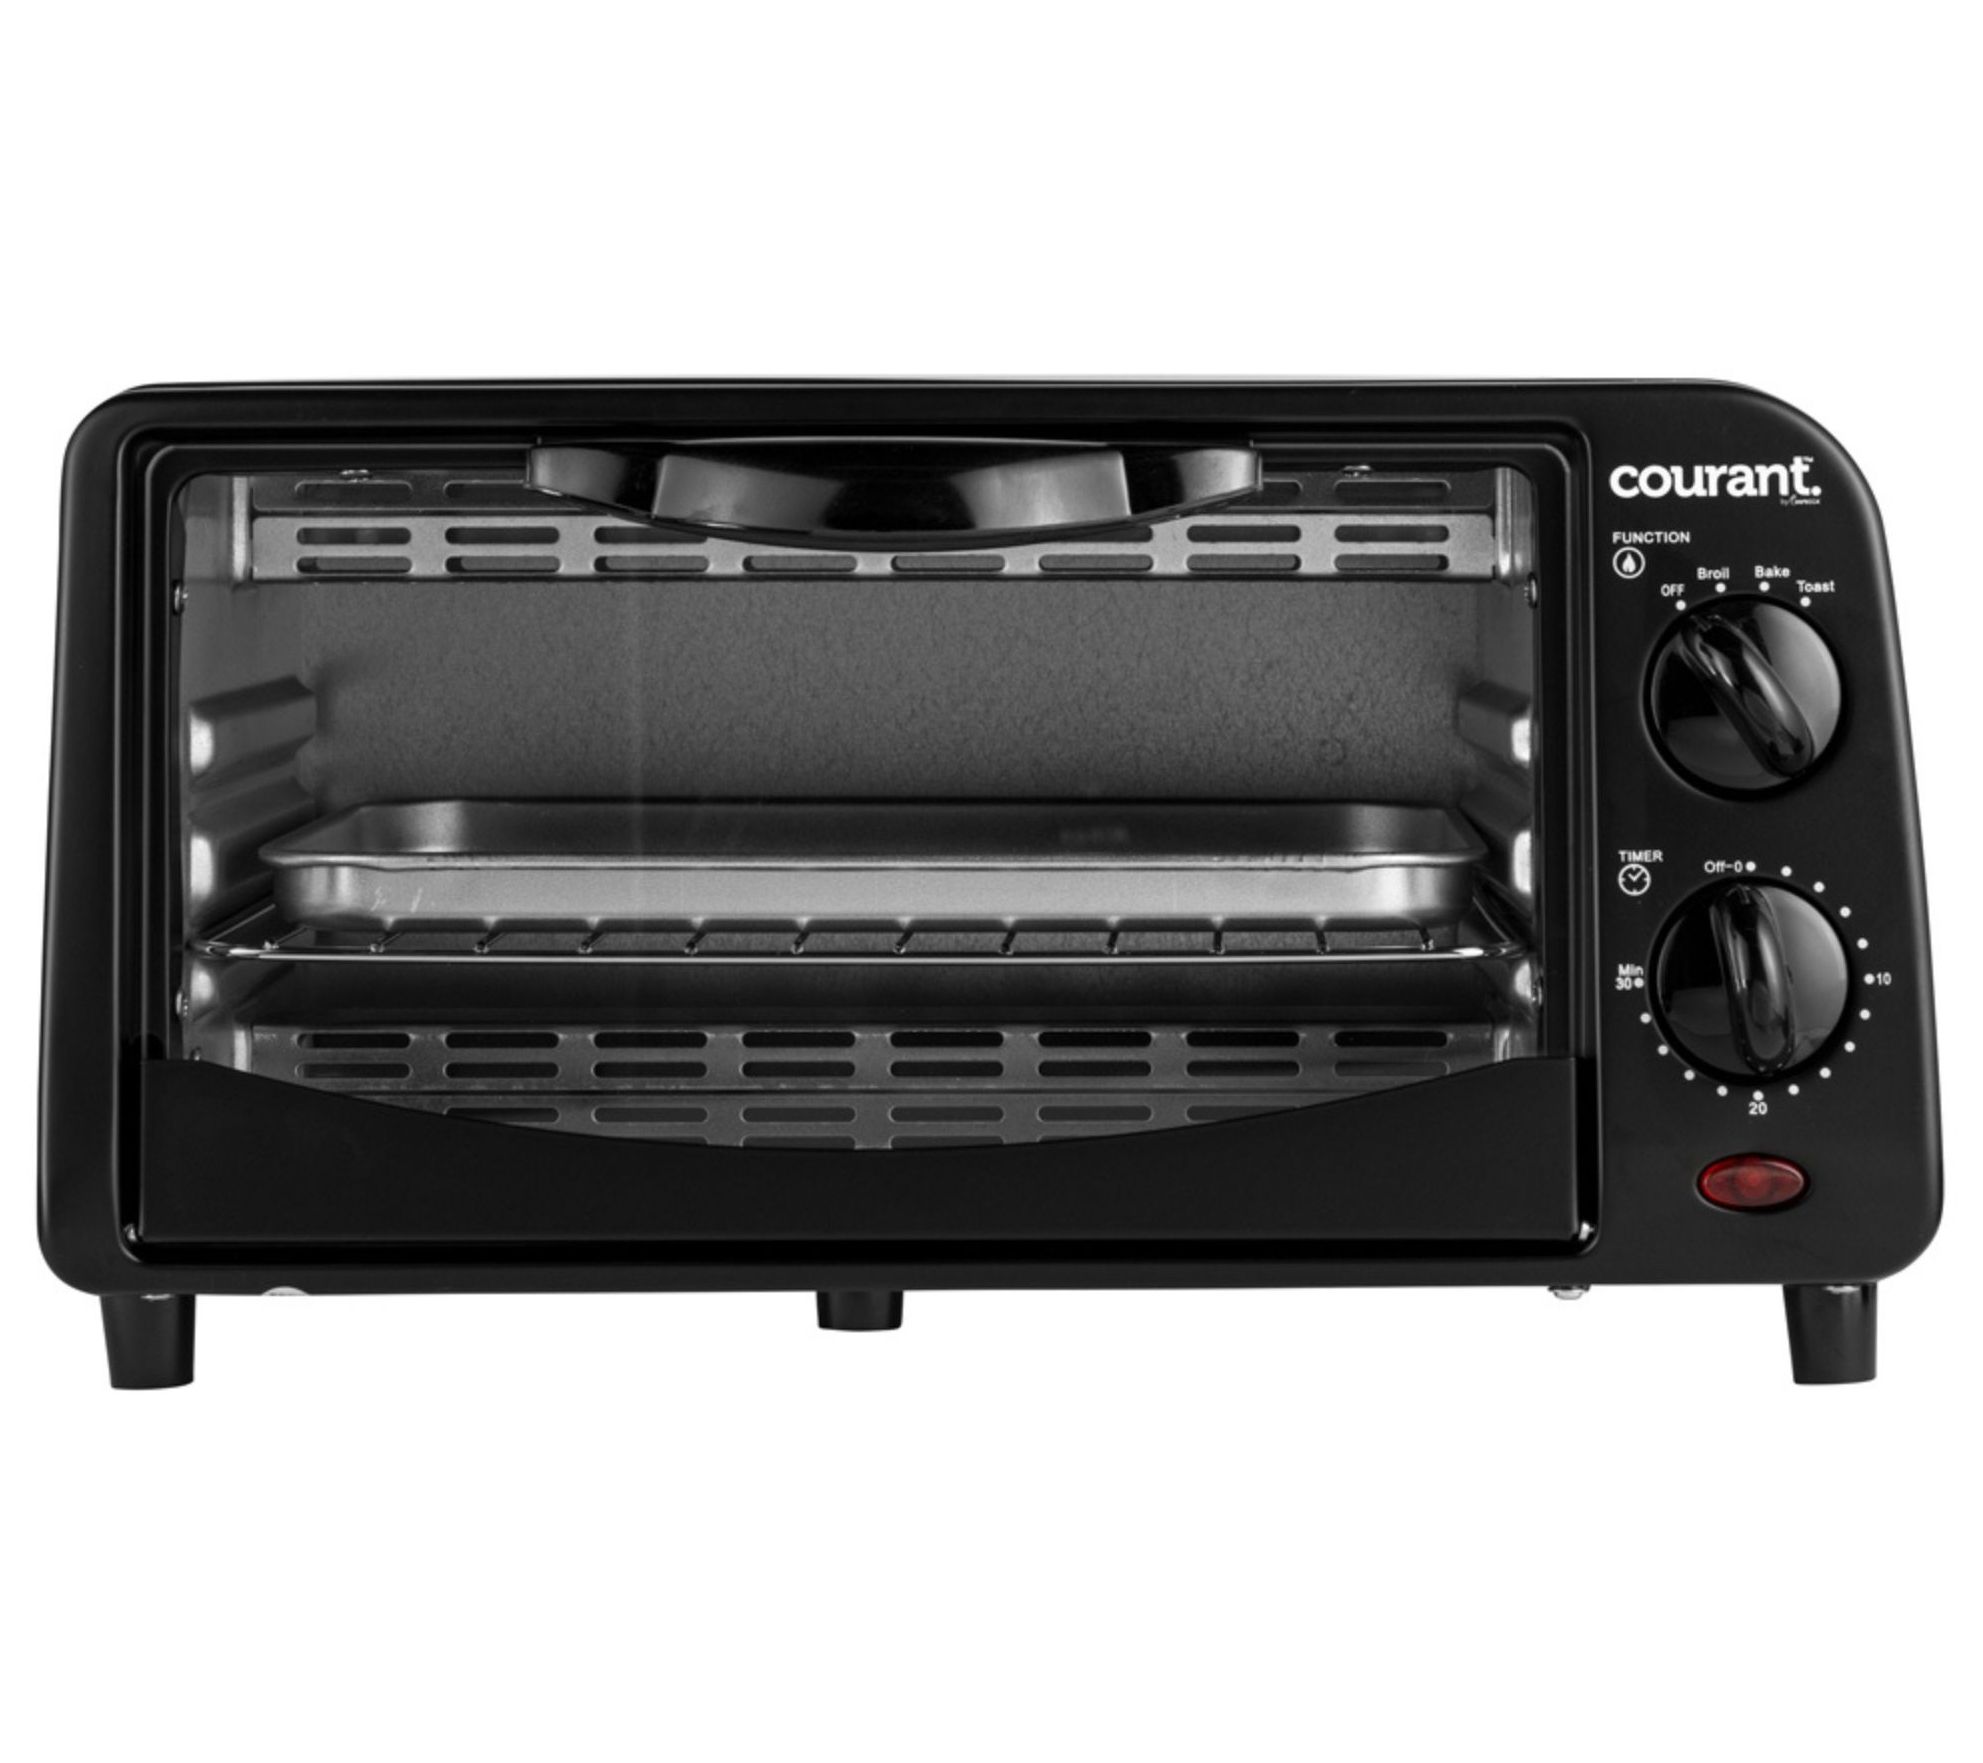 Black + Decker 4-Slice Toaster Oven, Stainless Steel, TO1705SB & Reviews